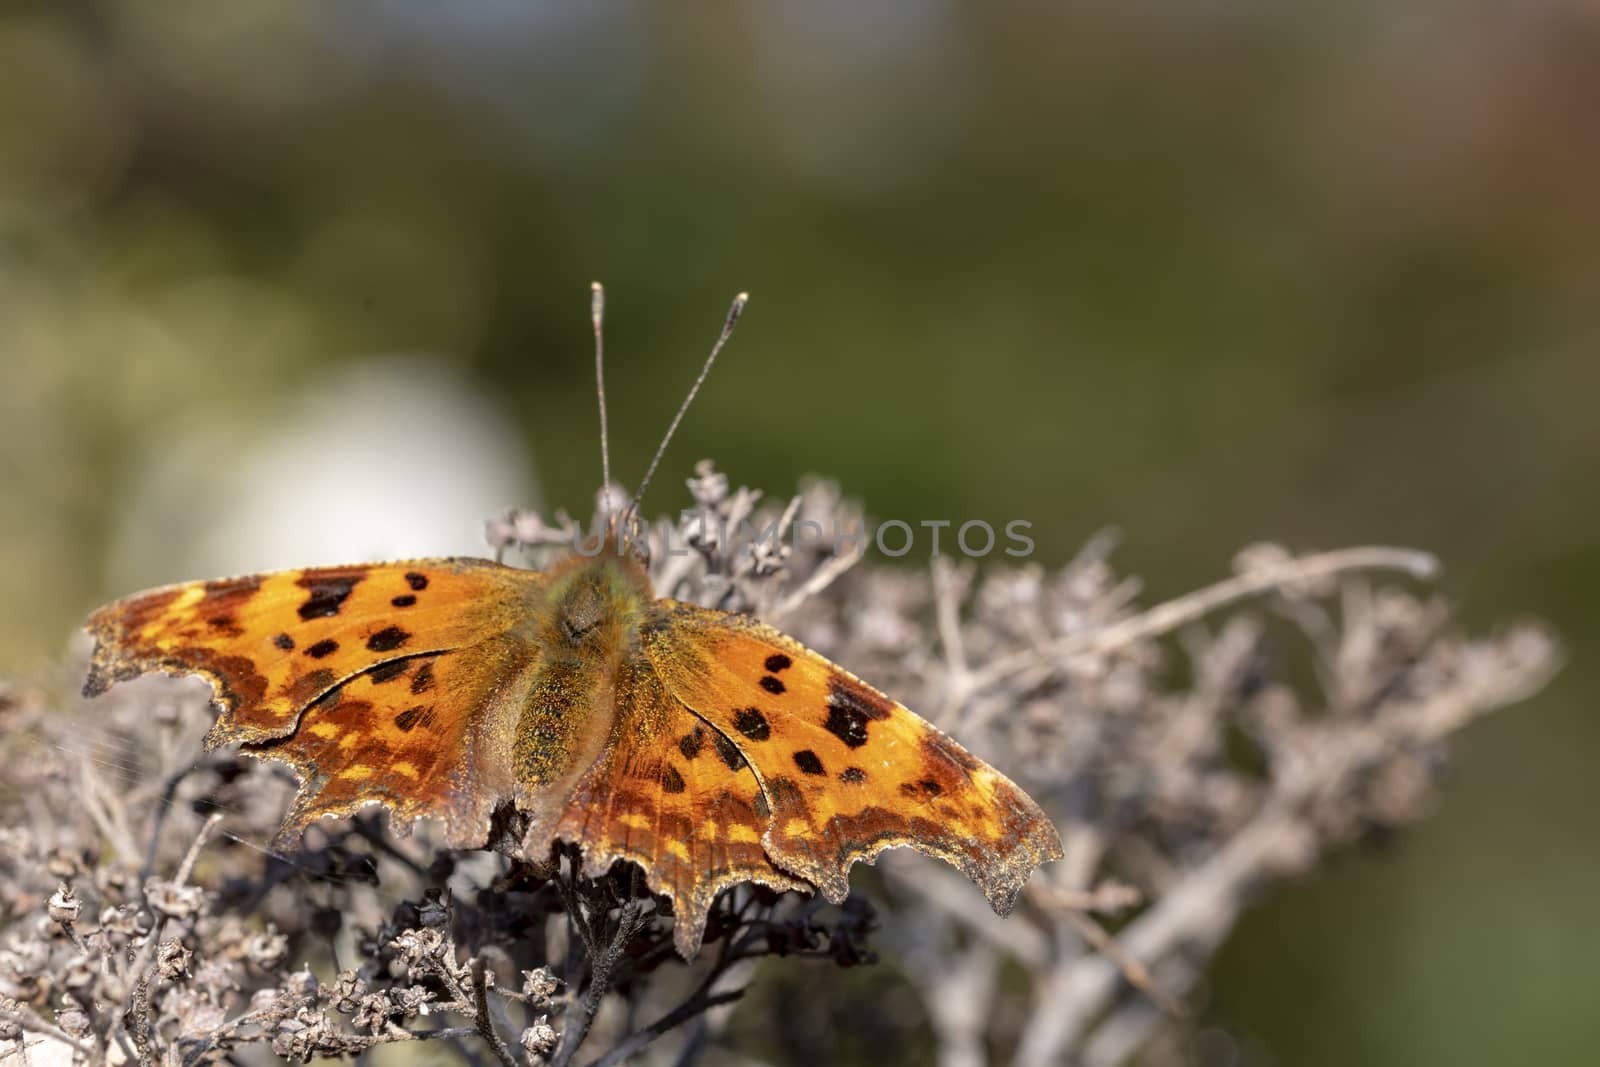 Polygonia c-album (comma) butterfly resting on a dried flower under the sun light by ankorlight